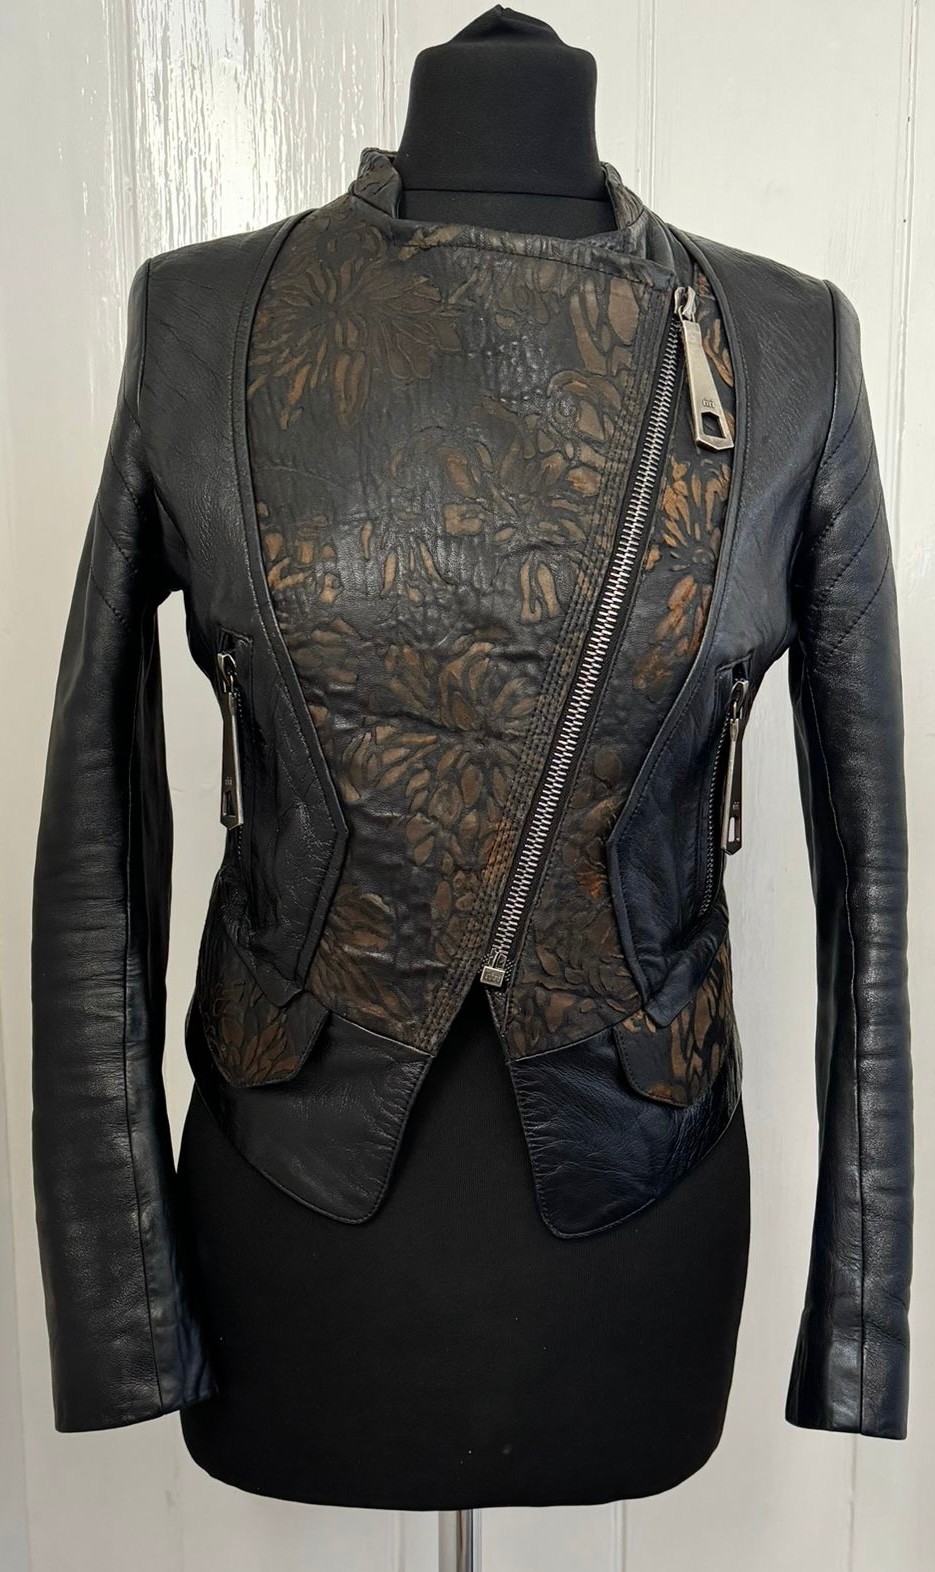 A real black leather jacket by Deja - Vu along with a genuine black leather Gucci Marmont bag. - Image 6 of 11